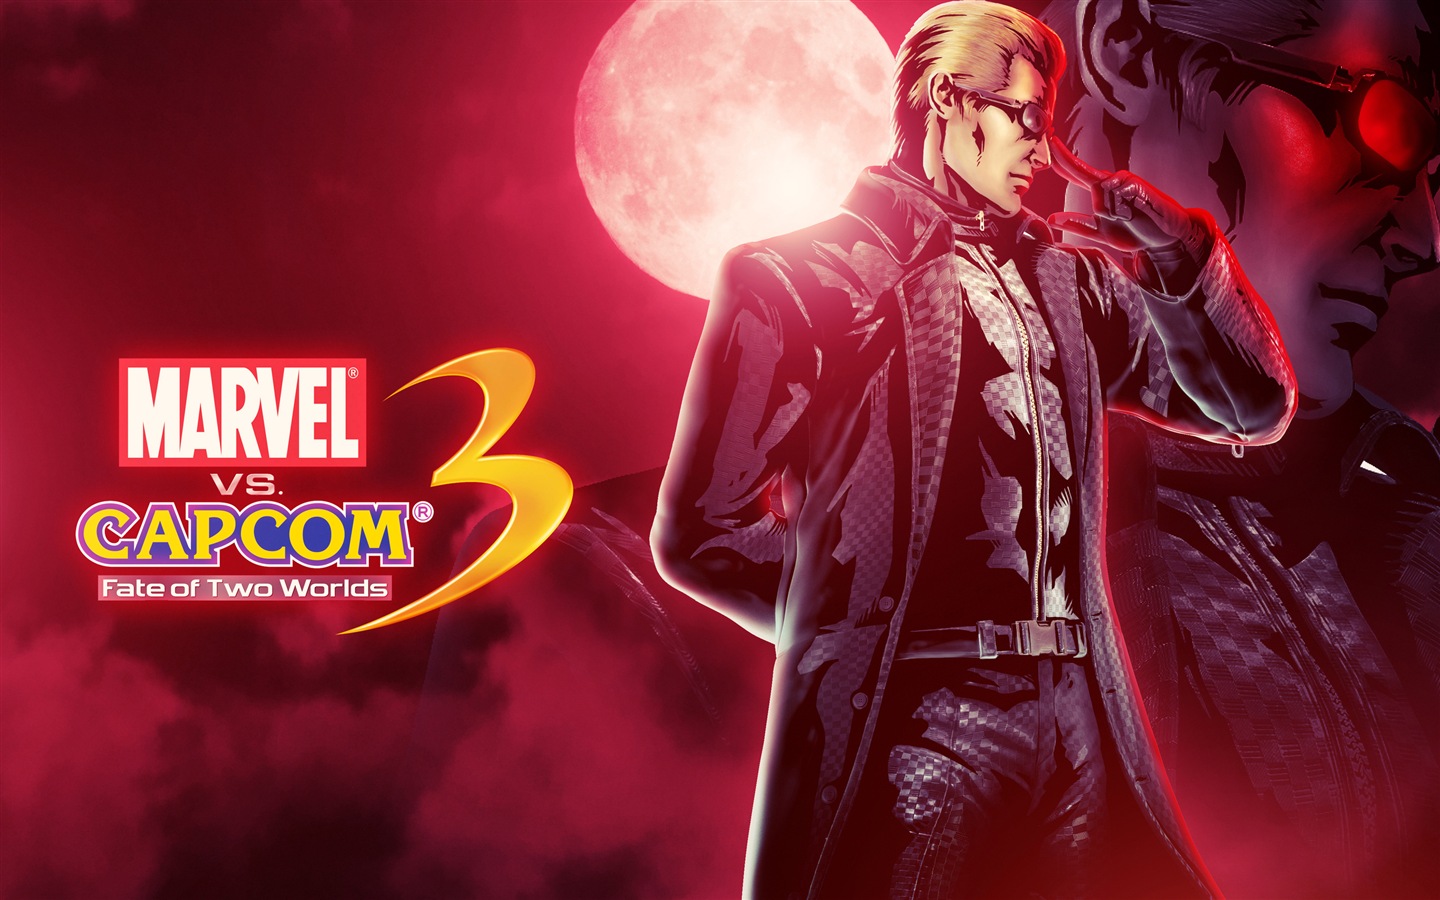 Marvel VS. Capcom 3: Fate of Two Worlds HD game wallpapers #9 - 1440x900